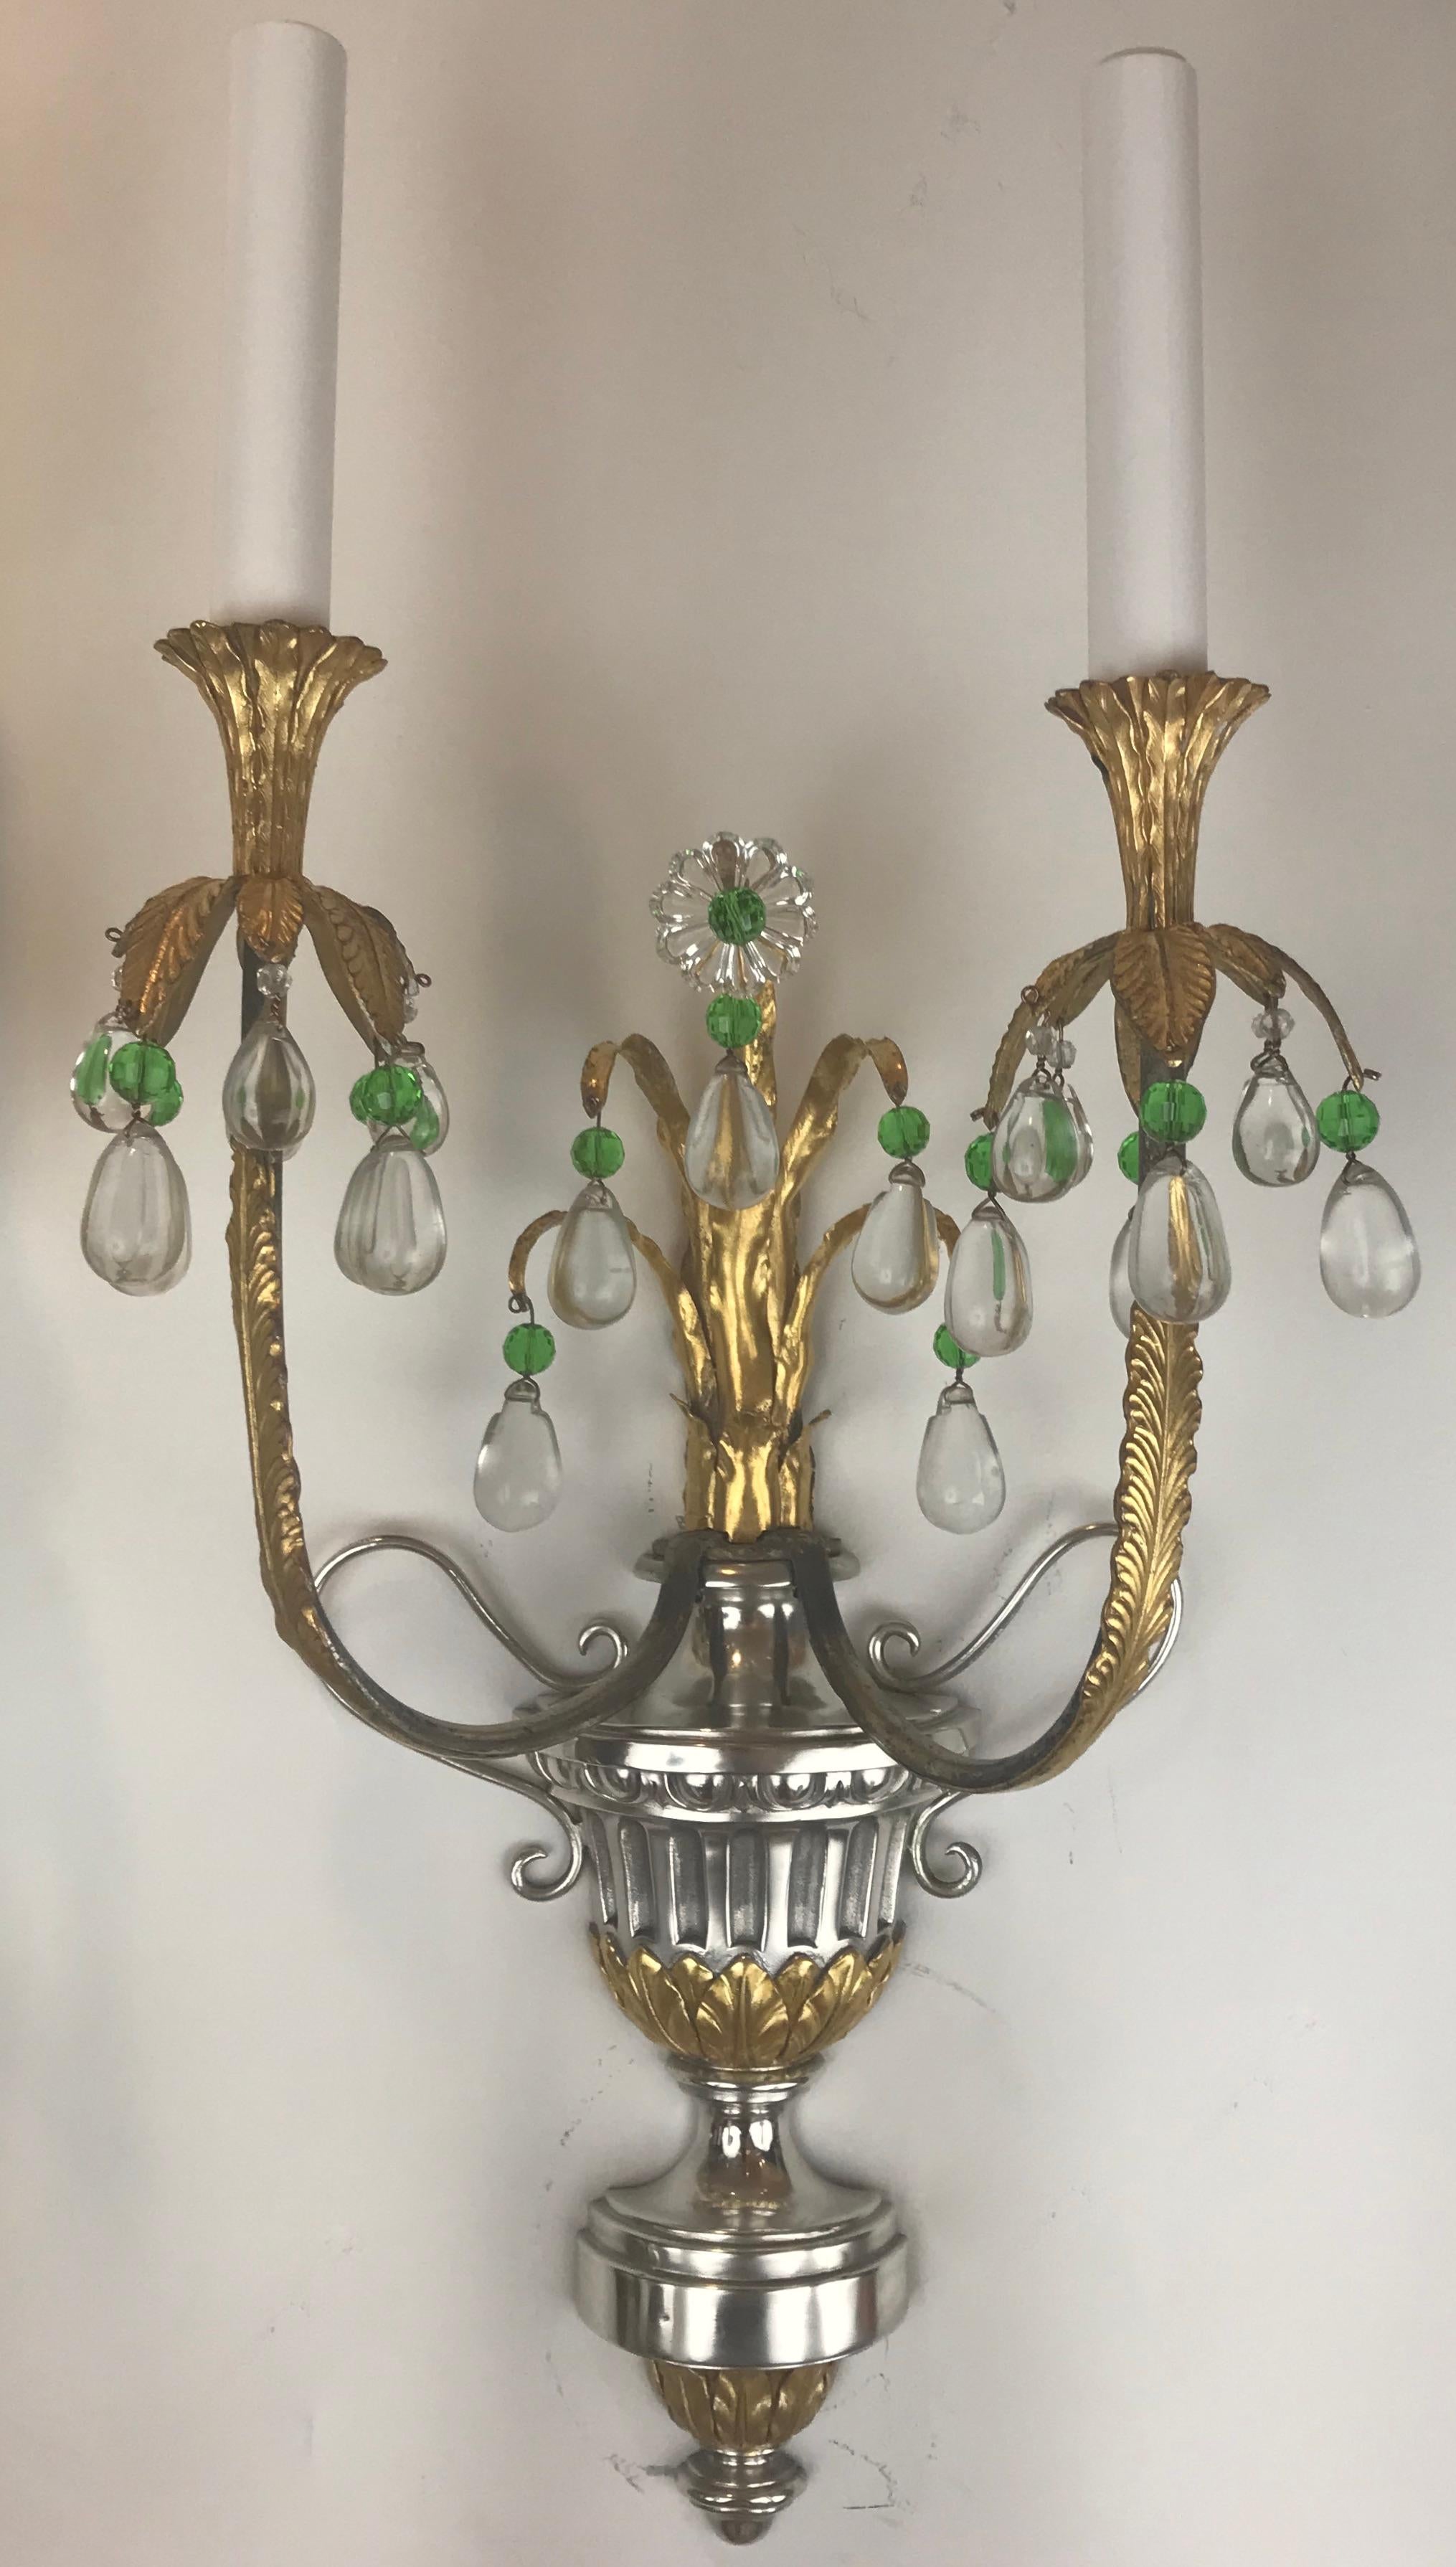  Four Silver and Gilt Bronze Sconces with Green Crystal Accents by Caldwell For Sale 2